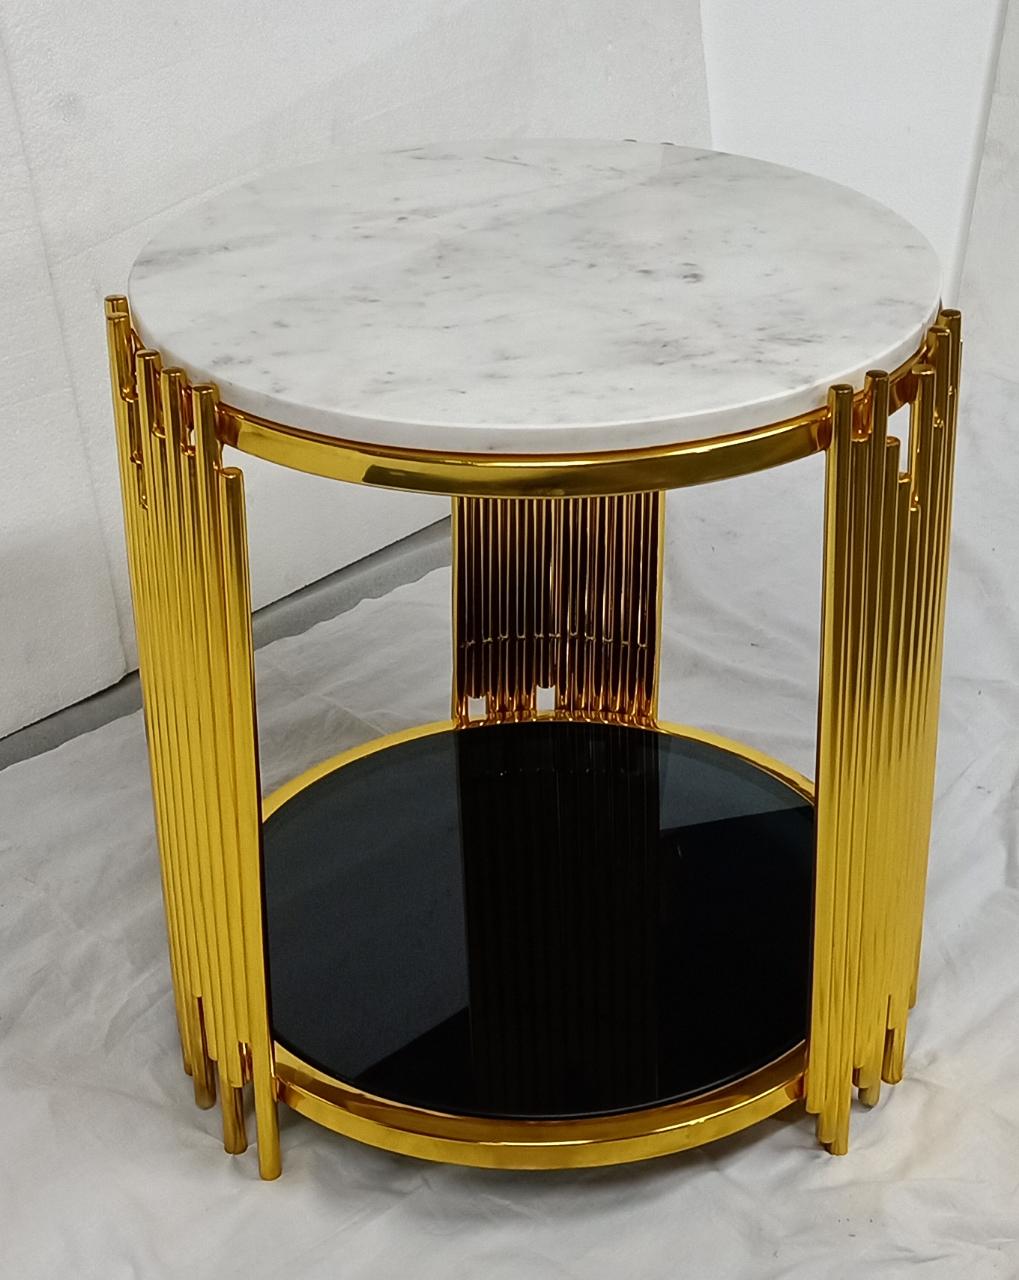 PC Home Decor | Steel Coffee Table with Glass Bottom and Marble Top, PC Home Decor | Golden Coffee Table with Black Glass Bottom, Gold and White